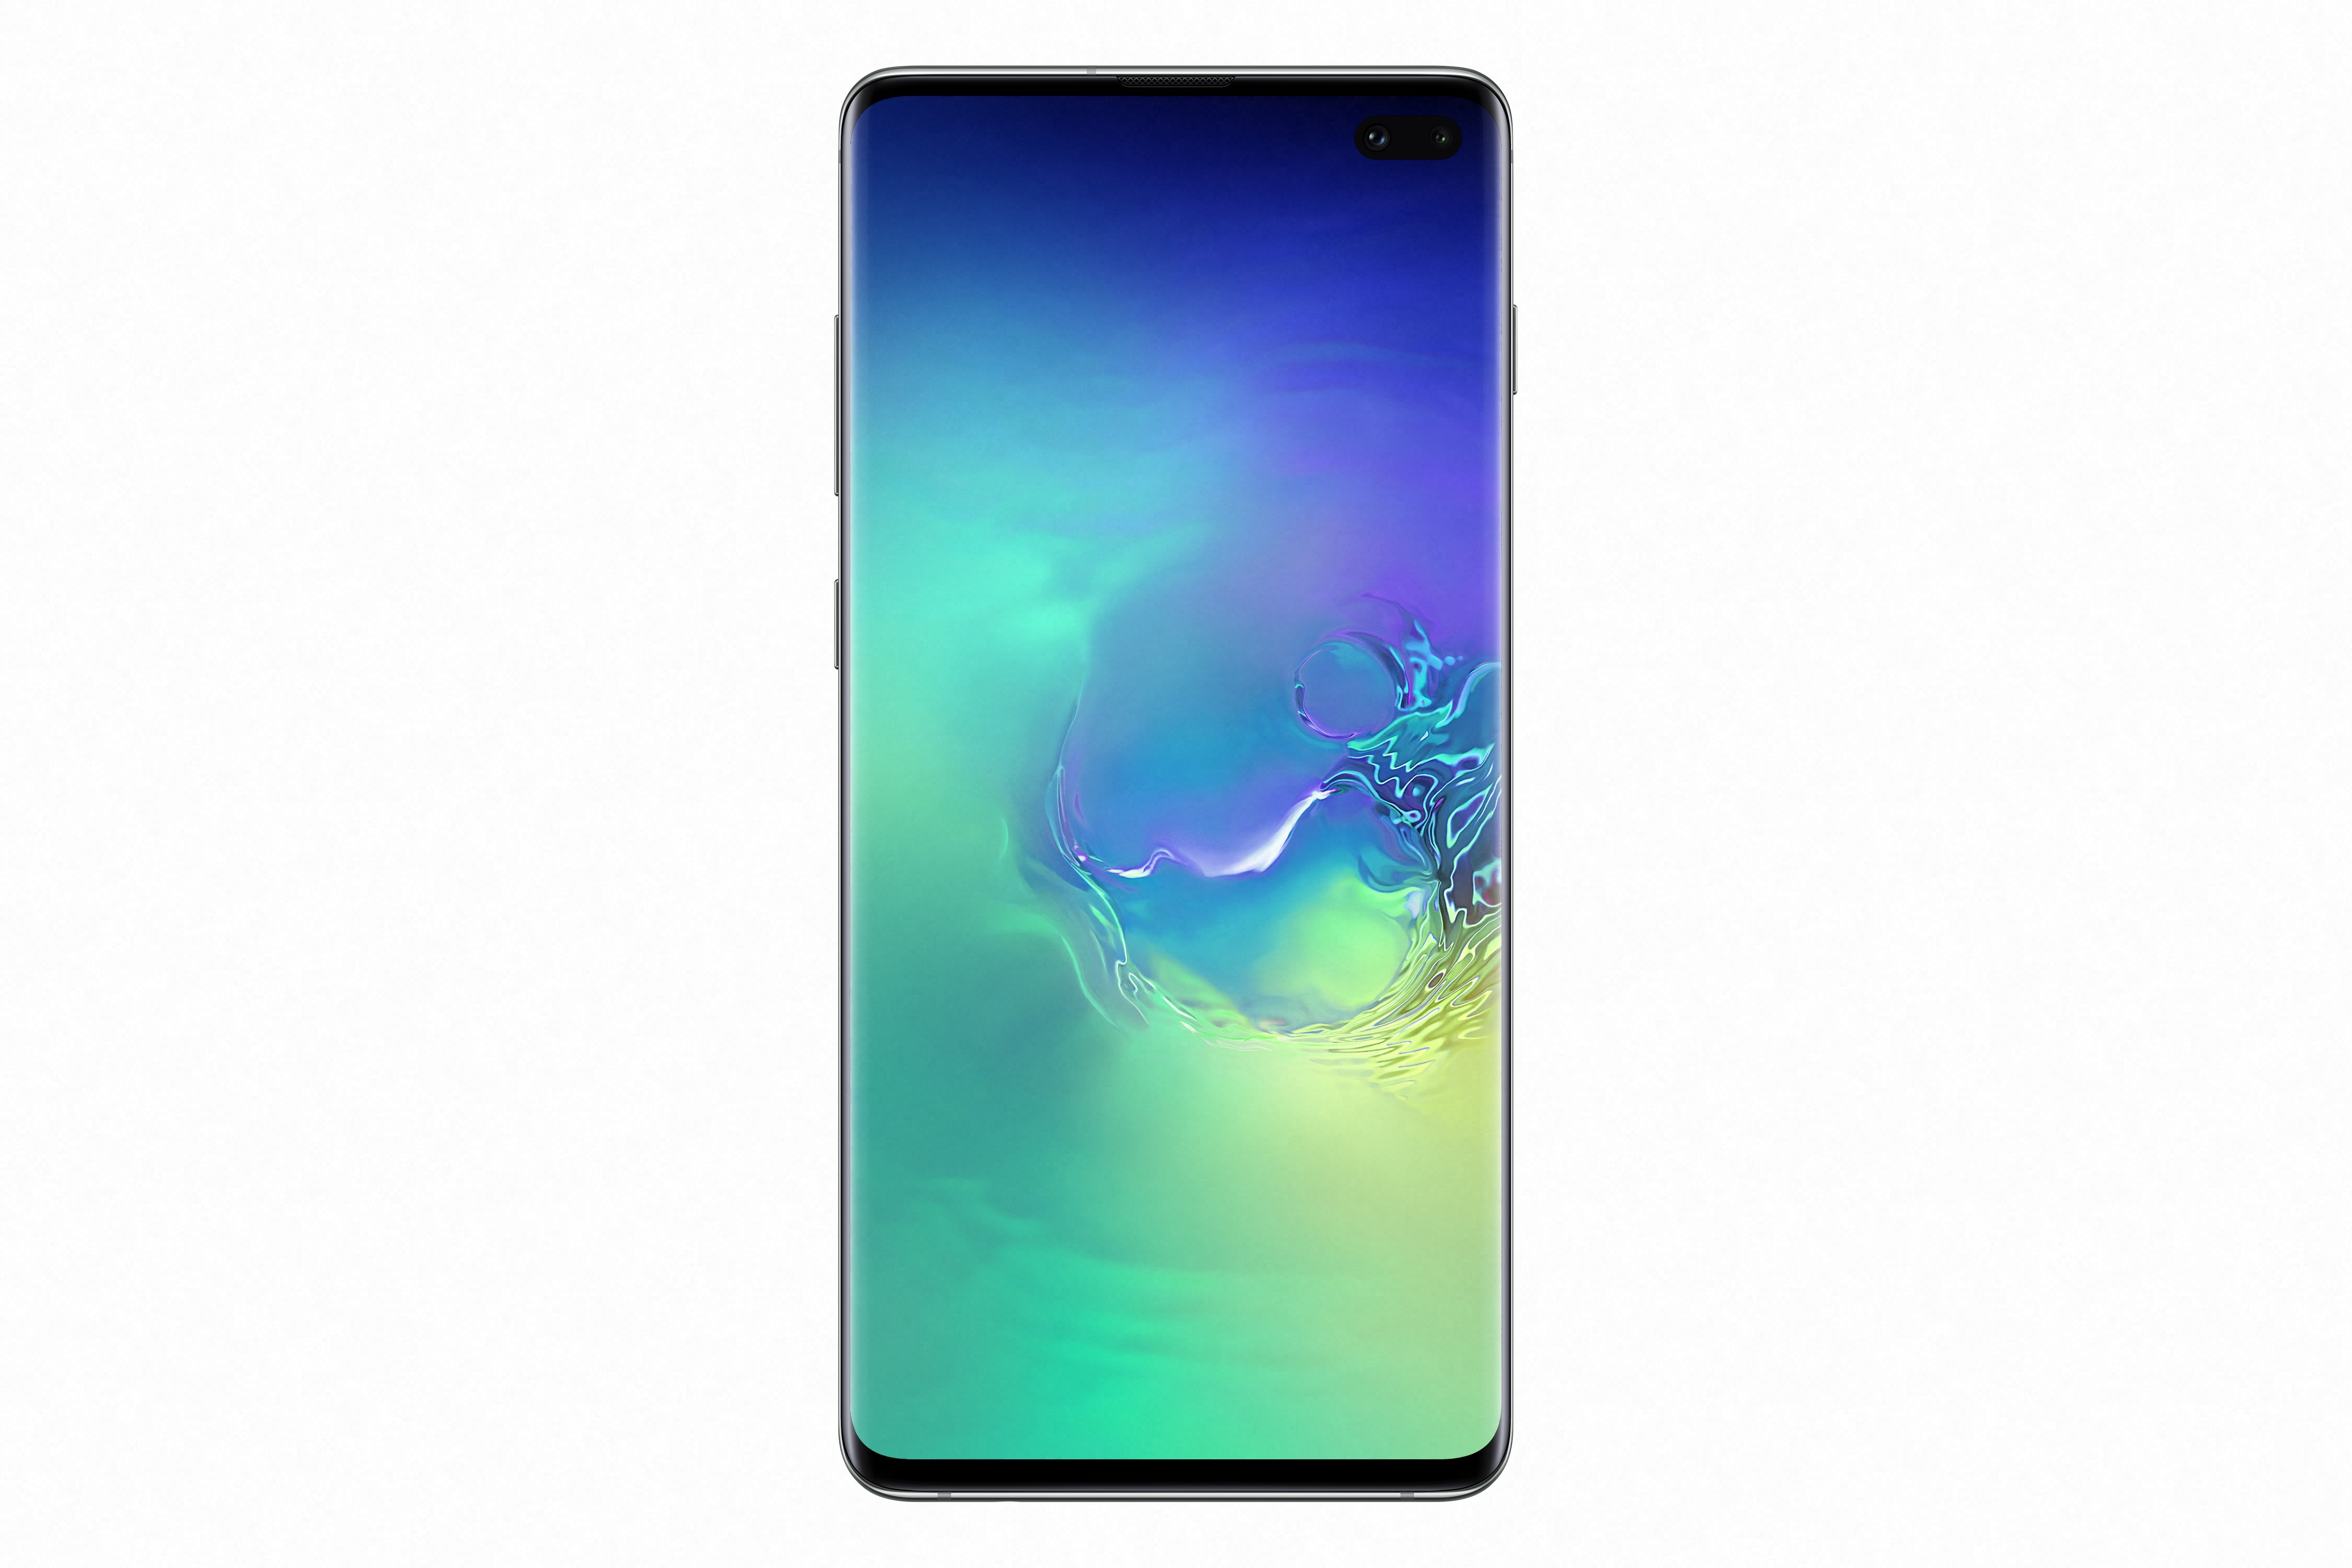 Galaxy S10 front